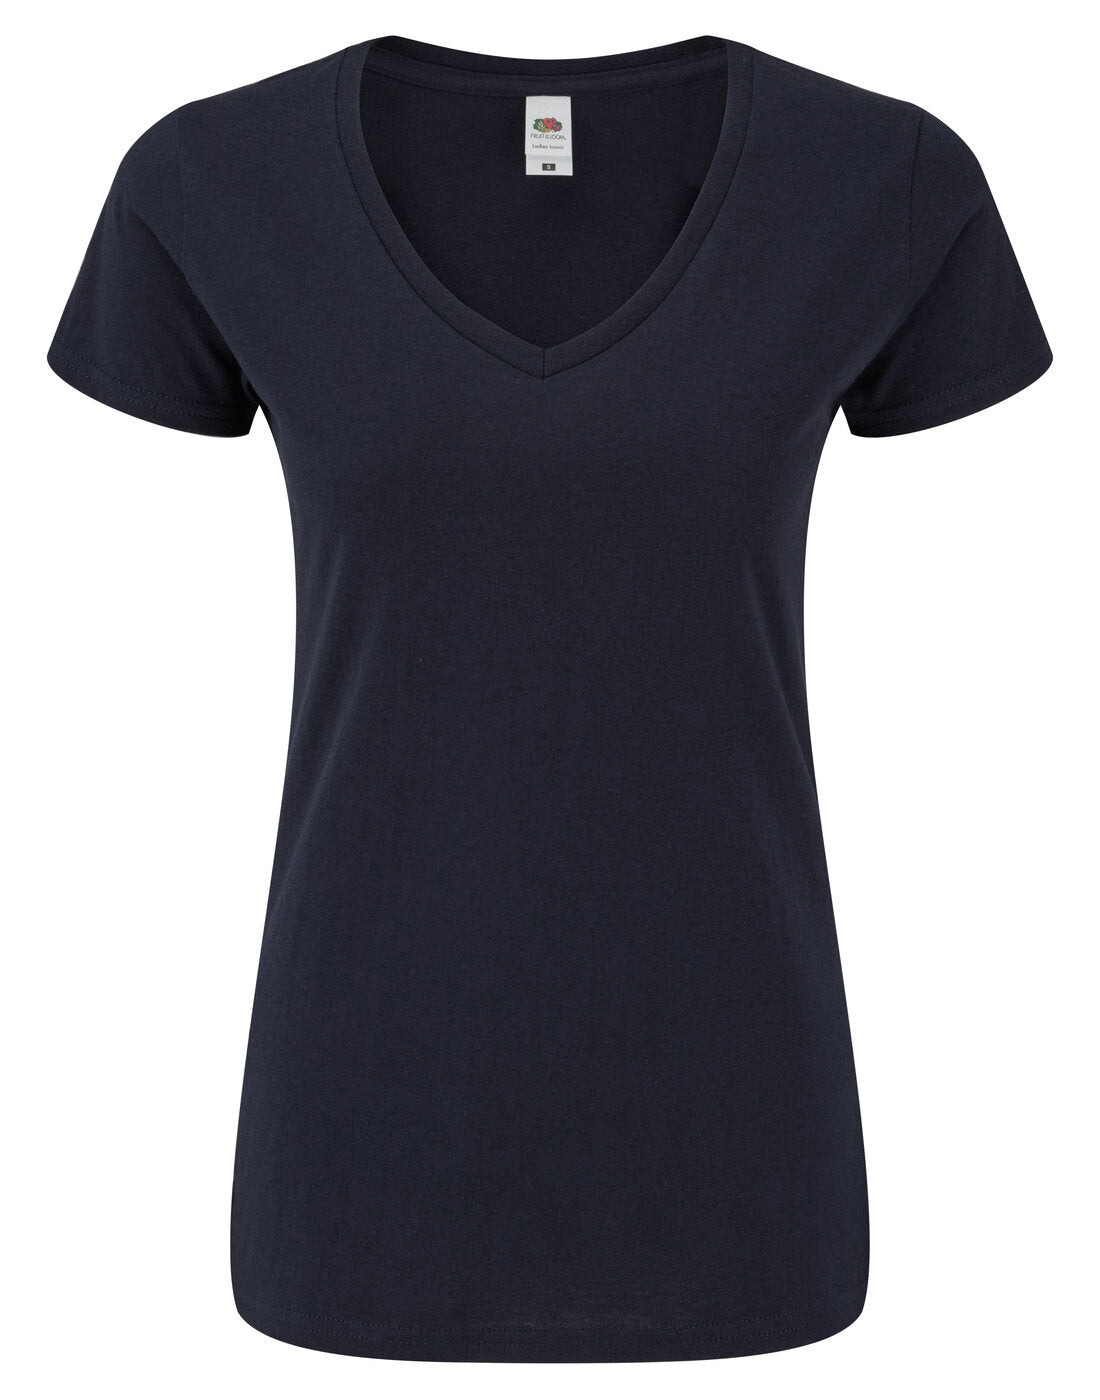 Fruit of the Loom Ladies Iconic 150 V Neck T - Deep Navy